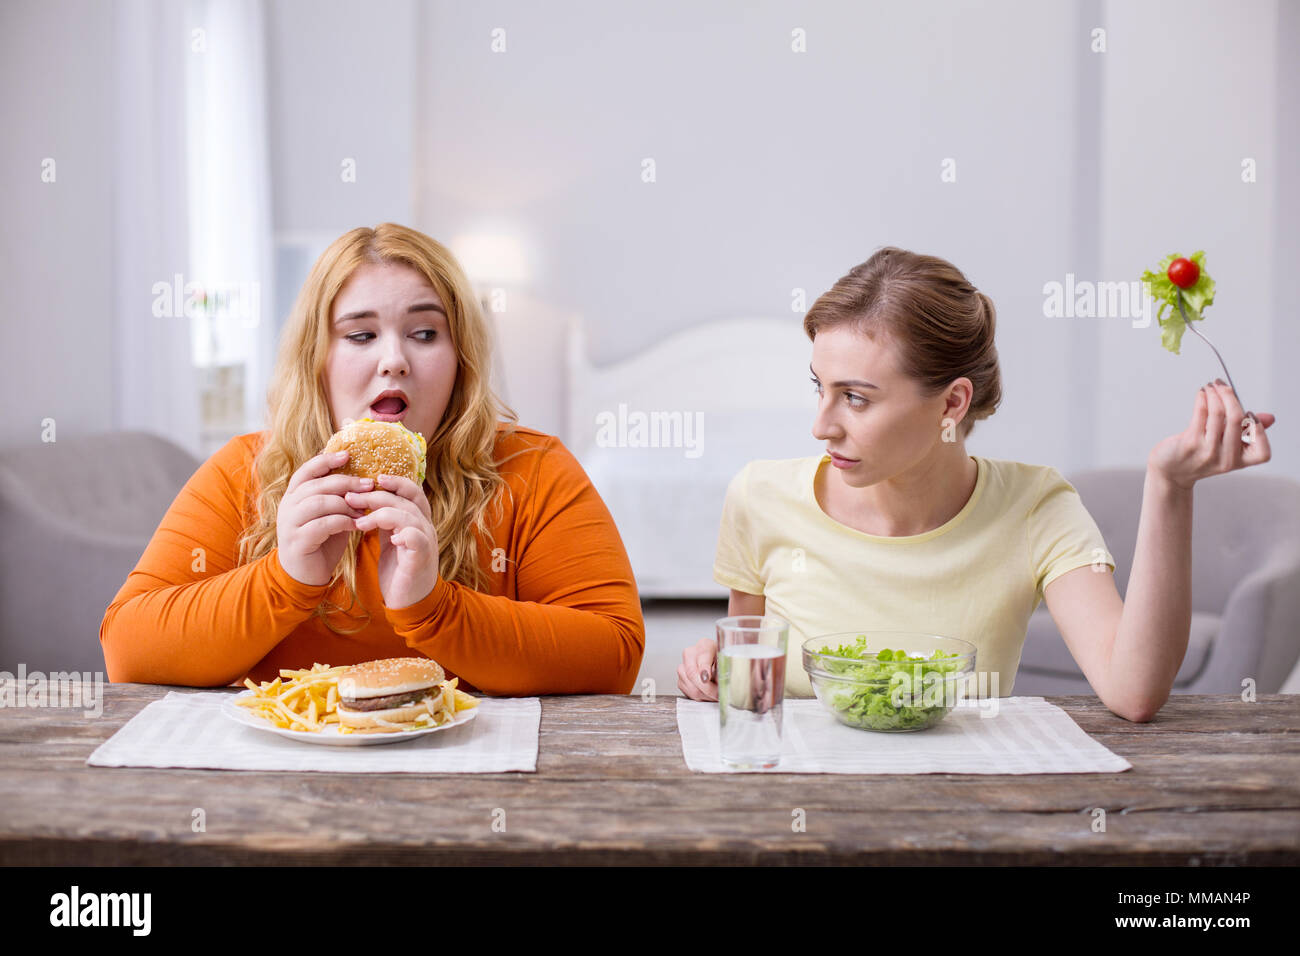 Excited plump woman having lunch with her friend Stock Photo